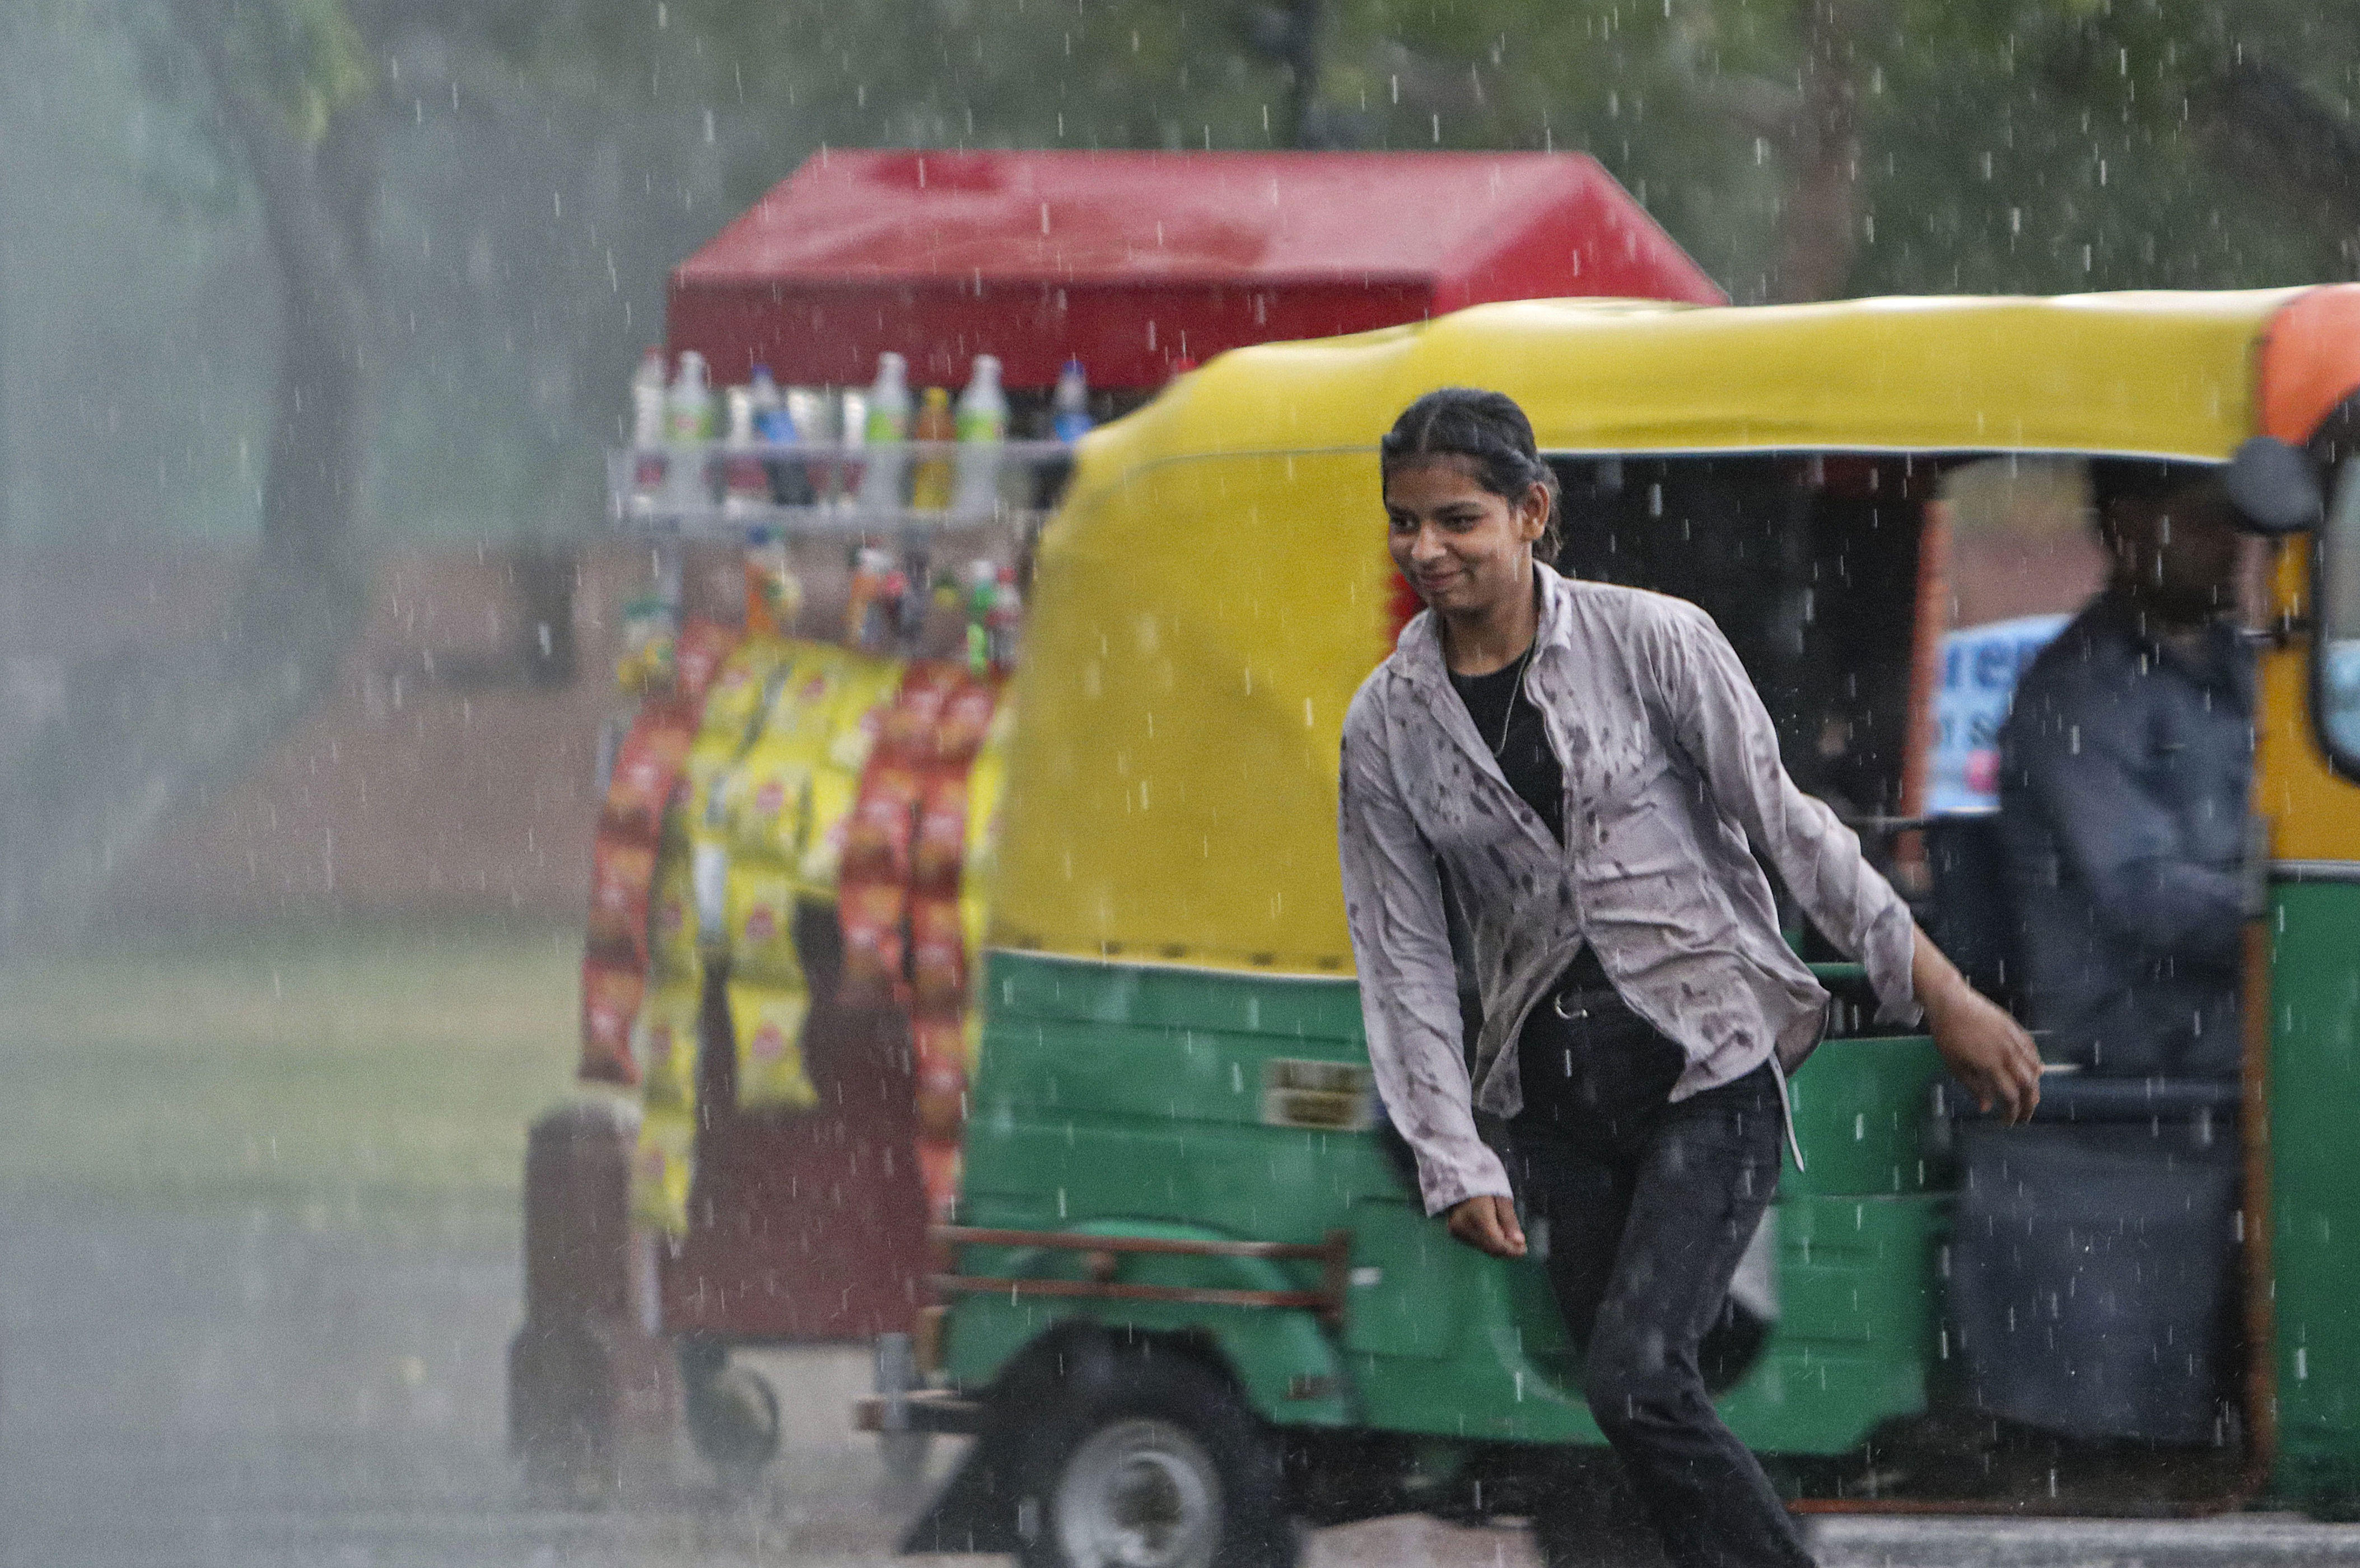 rains in parts of delhi-ncr, more likely on sunday